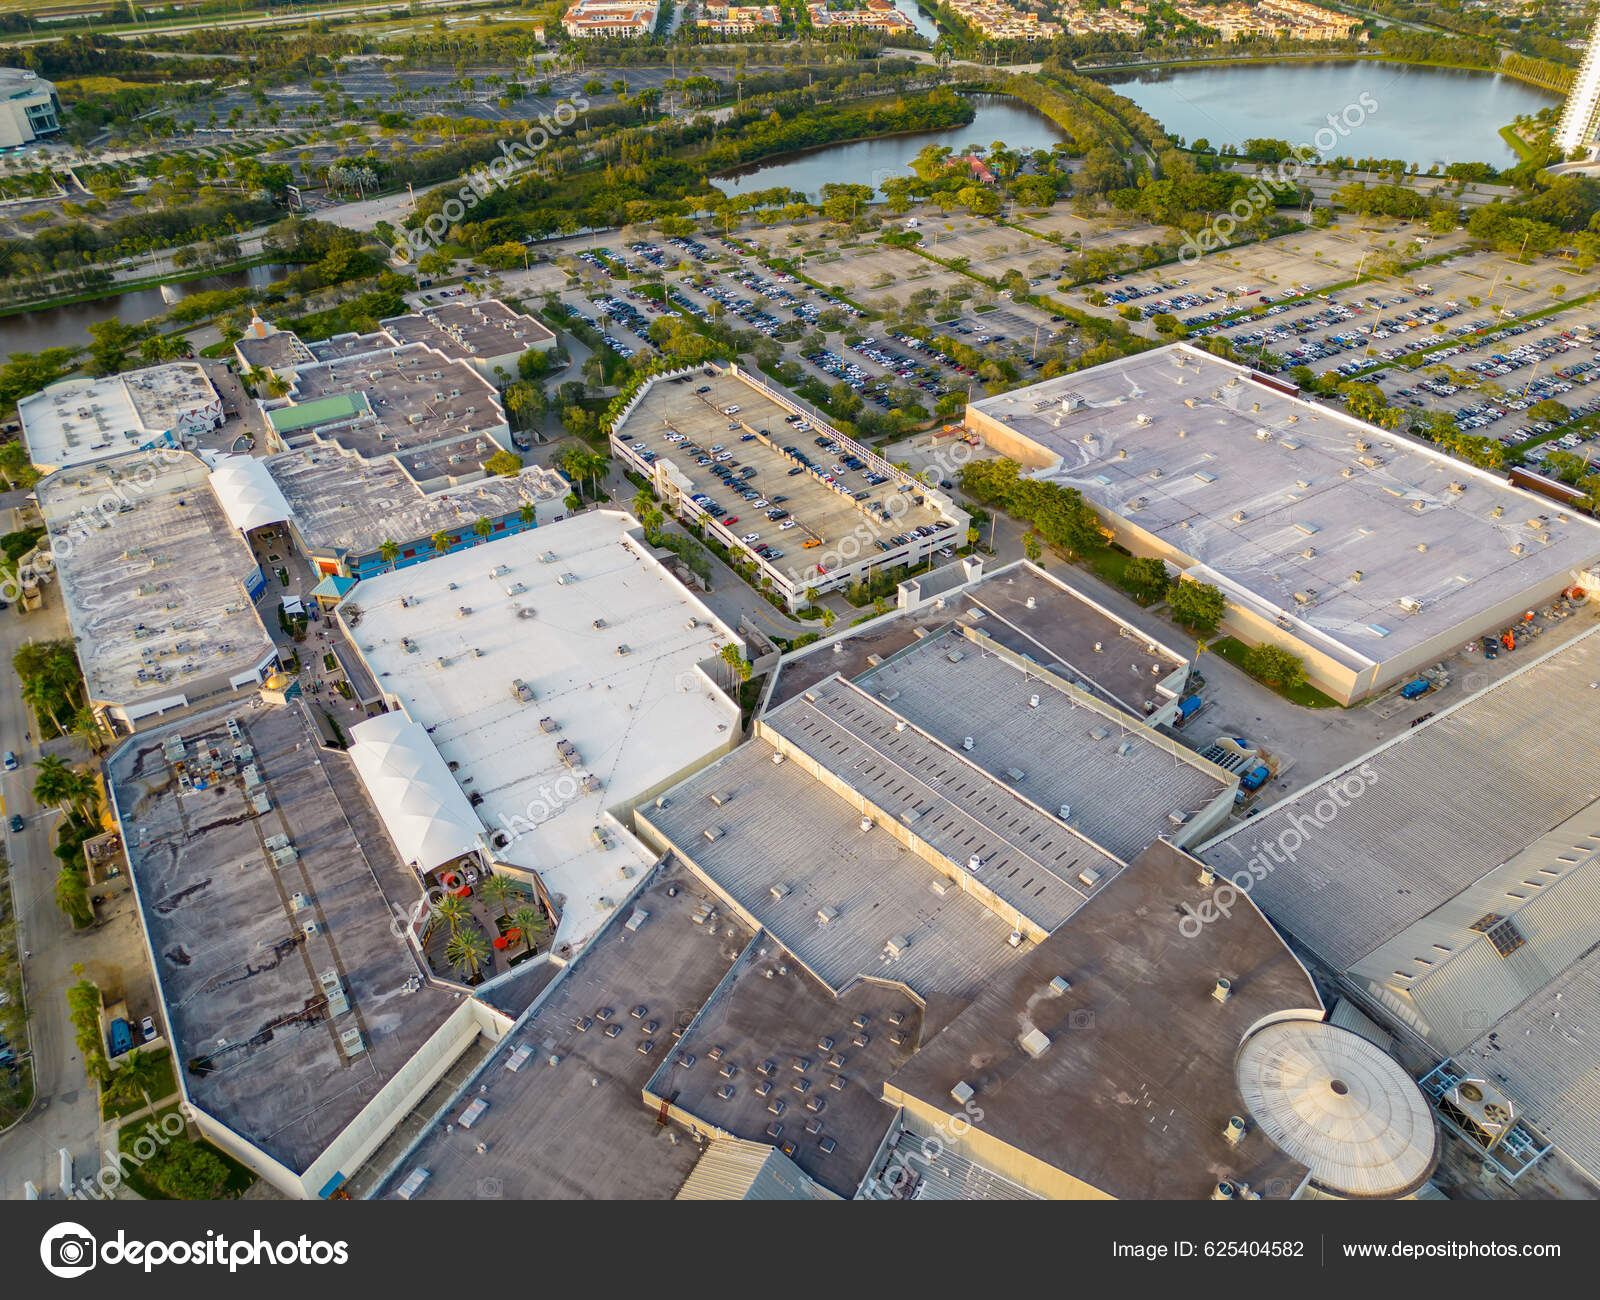 Sawgrass mills mall Stock Photos, Royalty Free Sawgrass mills mall Images